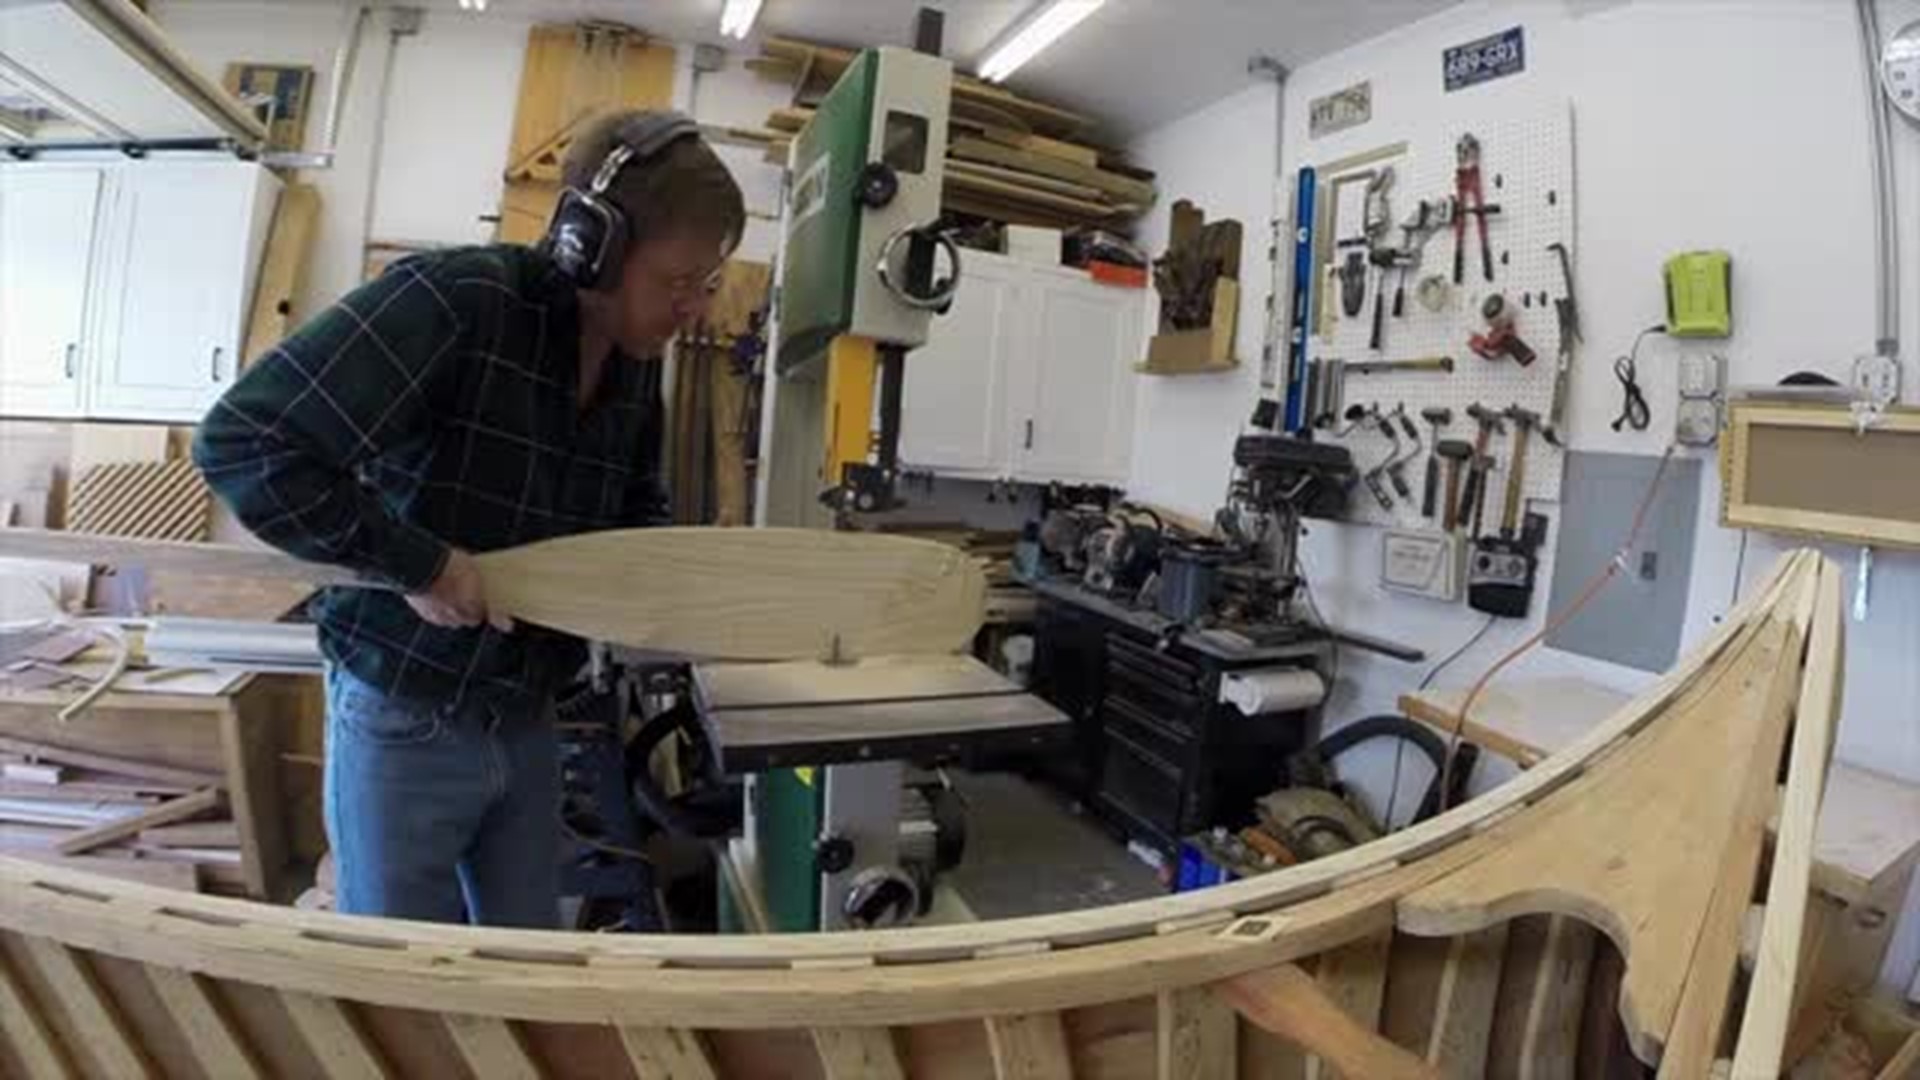 Restoring his father's canoe